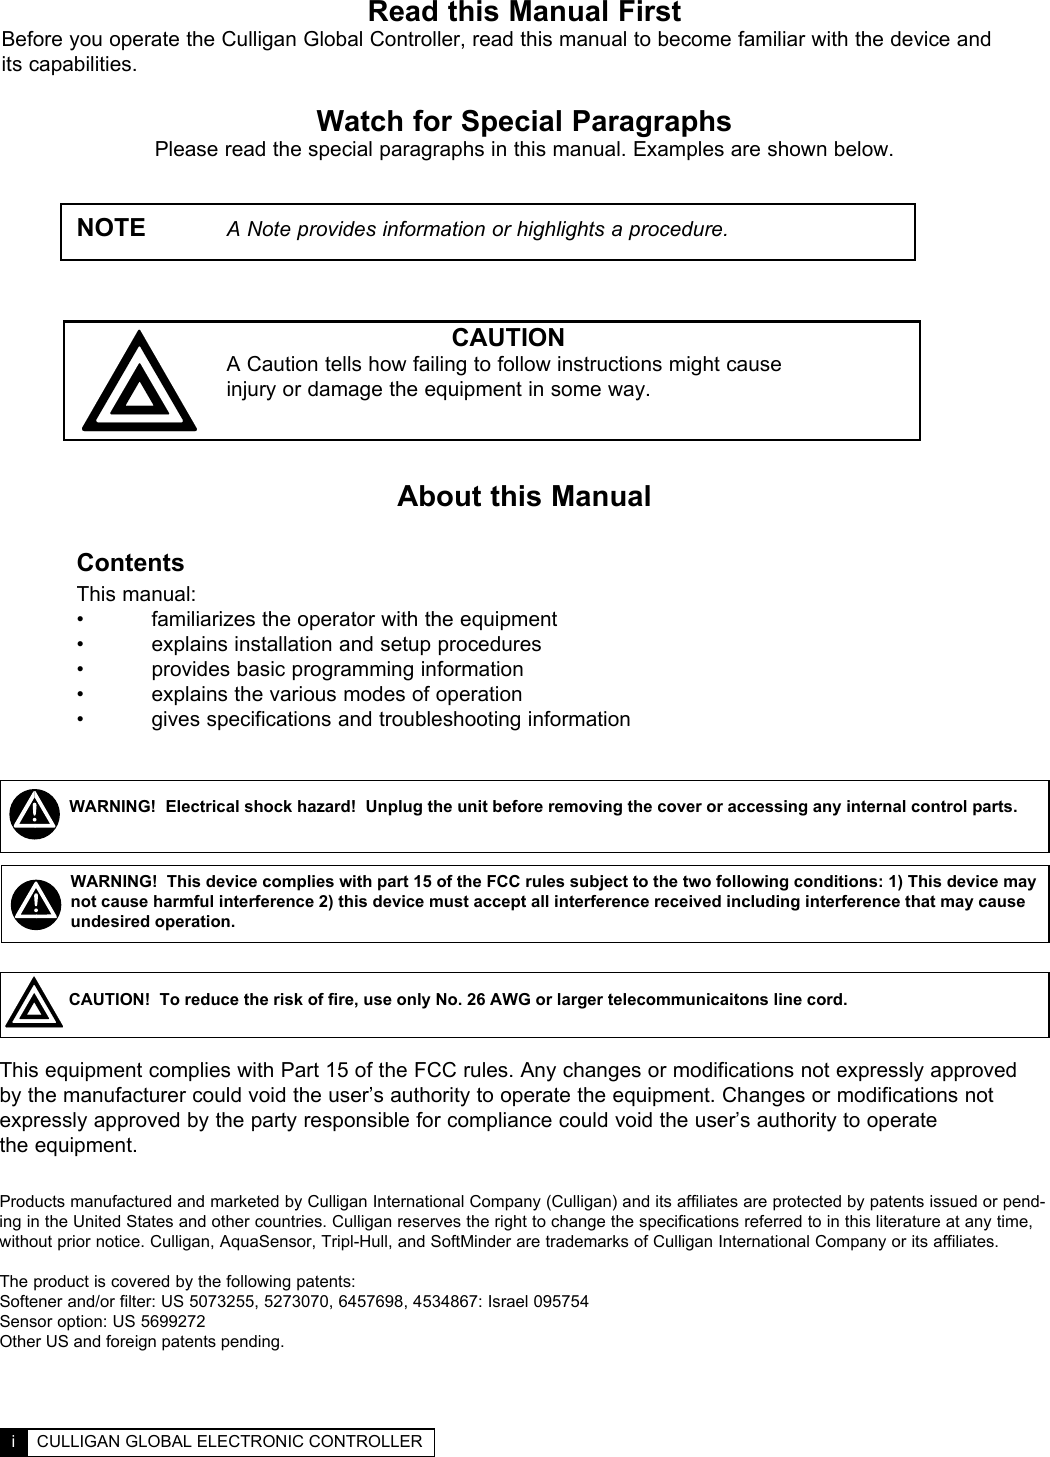 Read this Manual FirstBefore you operate the Culligan Global Controller, read this manual to become familiar with the device and  its capabilities.Watch for Special ParagraphsPlease read the special paragraphs in this manual. Examples are shown below.   NOTE   A Note provides information or highlights a procedure.                    CAUTION      A Caution tells how failing to follow instructions might cause       injury or damage the equipment in some way.About this Manual Contents This manual:  •  familiarizes the operator with the equipment  •  explains installation and setup procedures   •  provides basic programming information  •  explains the various modes of operation  •  gives specifications and troubleshooting information  TABLE OF CONTENTS  ii  i  CULLIGAN GLOBAL ELECTRONIC CONTROLLERThis equipment complies with Part 15 of the FCC rules. Any changes or modifications not expressly approved by the manufacturer could void the user’s authority to operate the equipment. Changes or modifications not expressly approved by the party responsible for compliance could void the user’s authority to operate  the equipment.WARNING!  Electrical shock hazard!  Unplug the unit before removing the cover or accessing any internal control parts.WARNING!  This device complies with part 15 of the FCC rules subject to the two following conditions: 1) This device may not cause harmful interference 2) this device must accept all interference received including interference that may cause undesired operation.CAUTION!  To reduce the risk of fire, use only No. 26 AWG or larger telecommunicaitons line cord.Products manufactured and marketed by Culligan International Company (Culligan) and its affiliates are protected by patents issued or pend-ing in the United States and other countries. Culligan reserves the right to change the specifications referred to in this literature at any time, without prior notice. Culligan, AquaSensor, Tripl-Hull, and SoftMinder are trademarks of Culligan International Company or its affiliates.The product is covered by the following patents:Softener and/or filter: US 5073255, 5273070, 6457698, 4534867: Israel 095754Sensor option: US 5699272Other US and foreign patents pending.